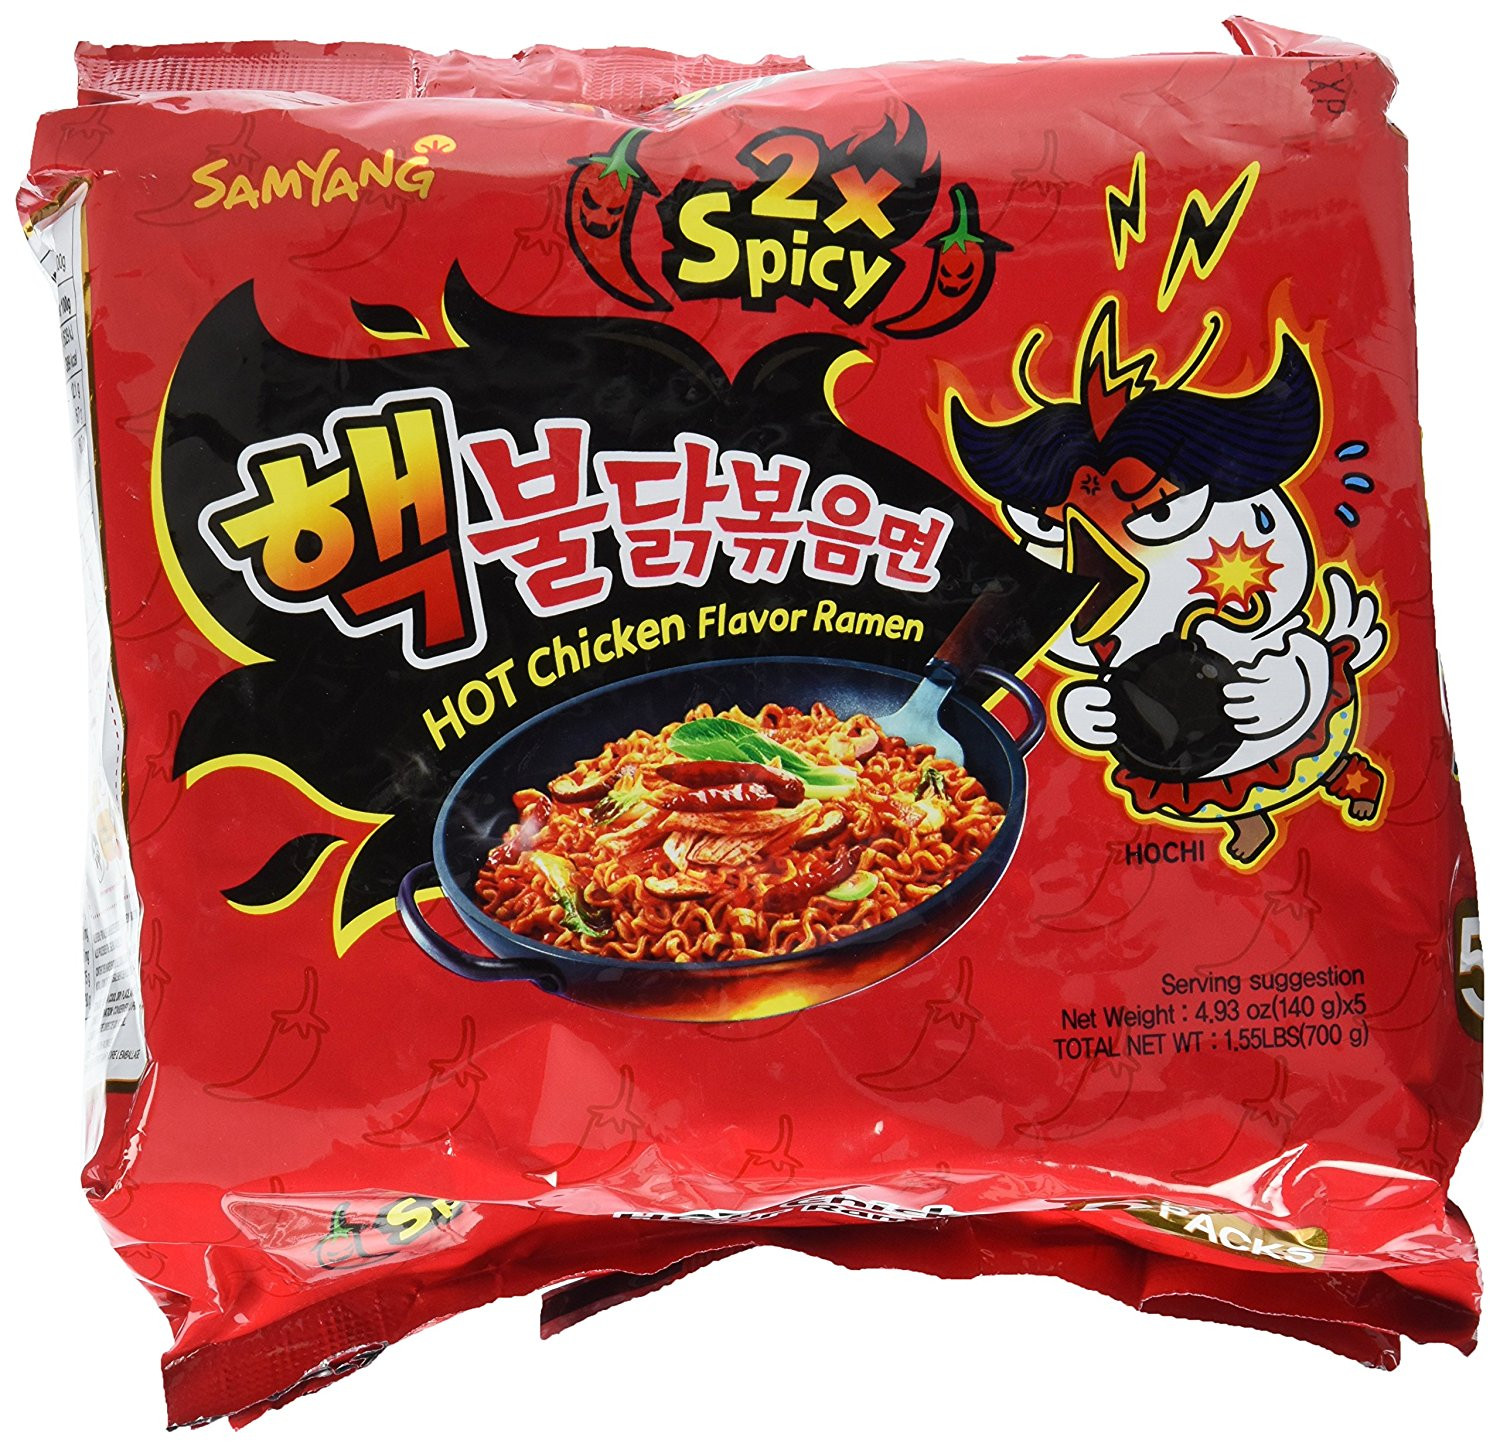 Nuclear Spicy Noodles
 Trying the Nuclear Fire Noodles 2x the heat 핵불닭볶음면 behgopa